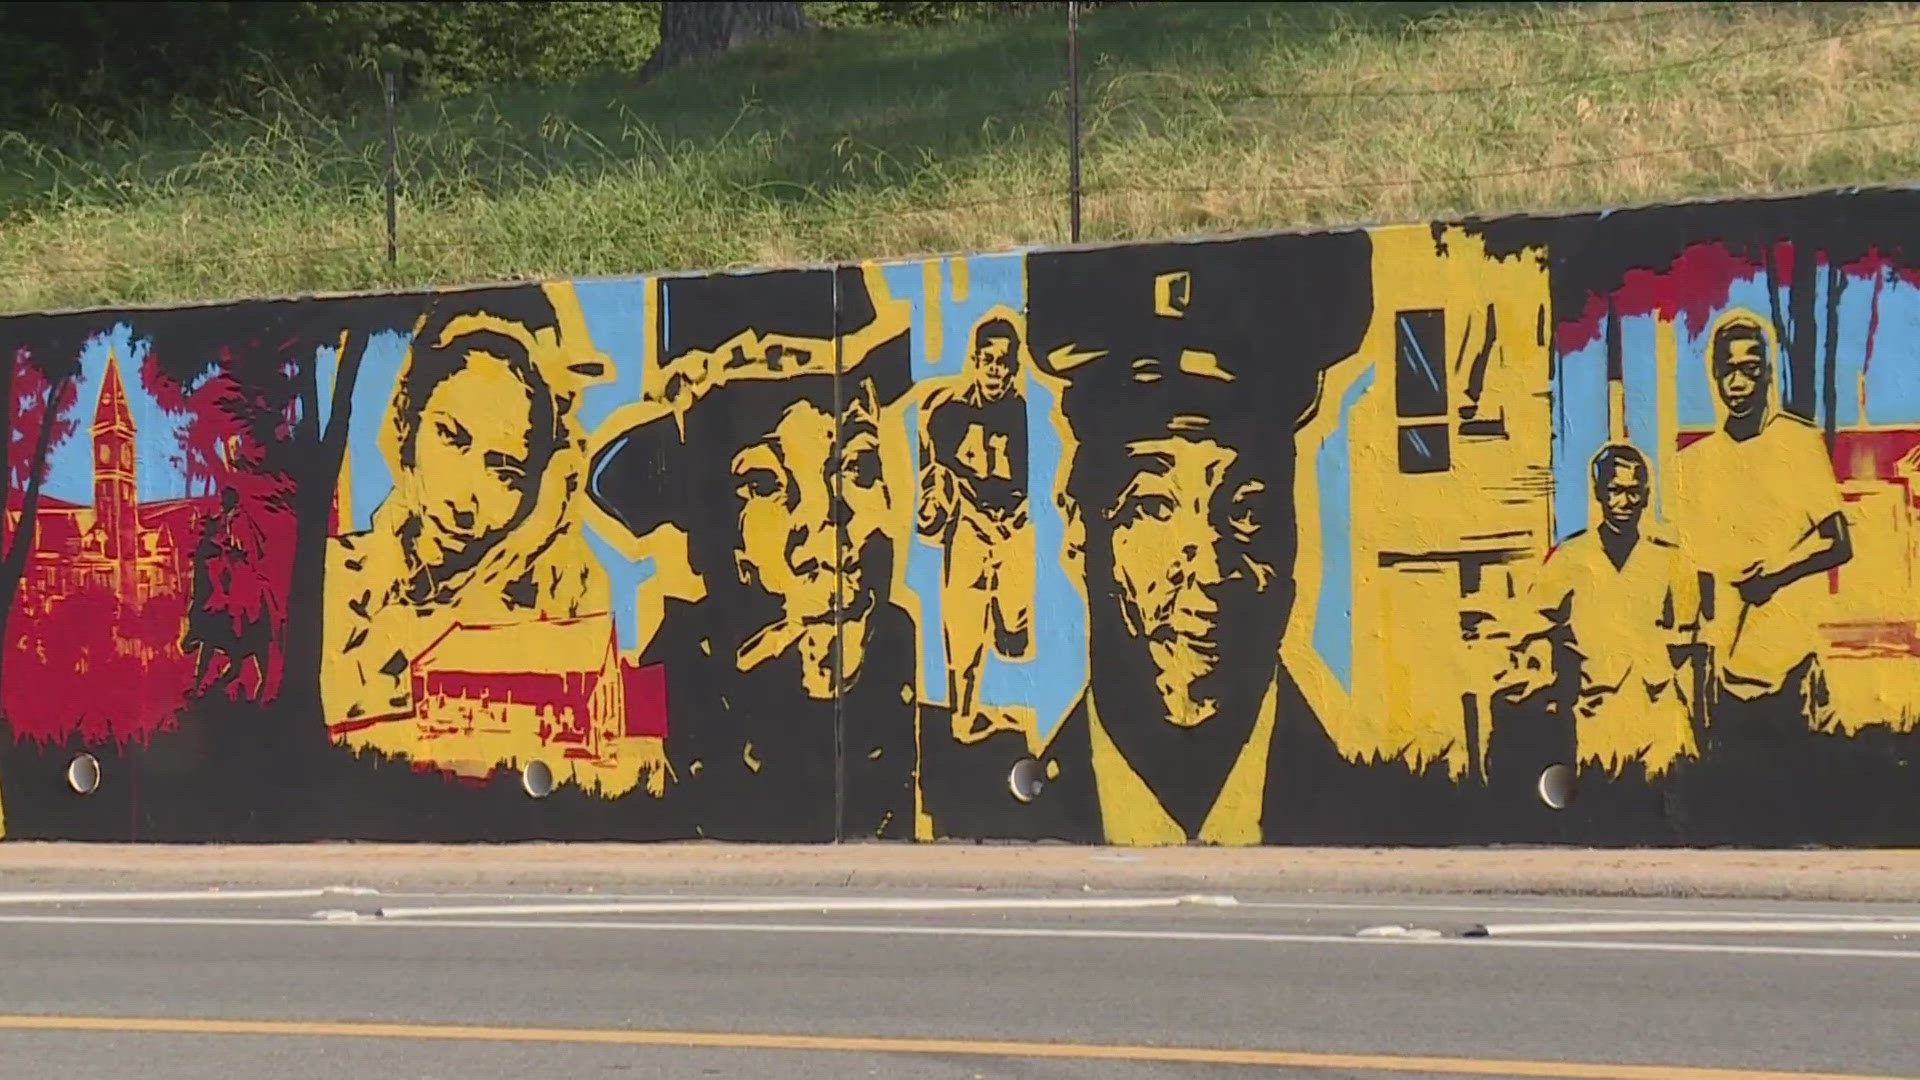 The mural is 90 feet long. It is part of an ongoing effort to cover a 500-foot-long concrete retaining wall along the road with murals by 2028.